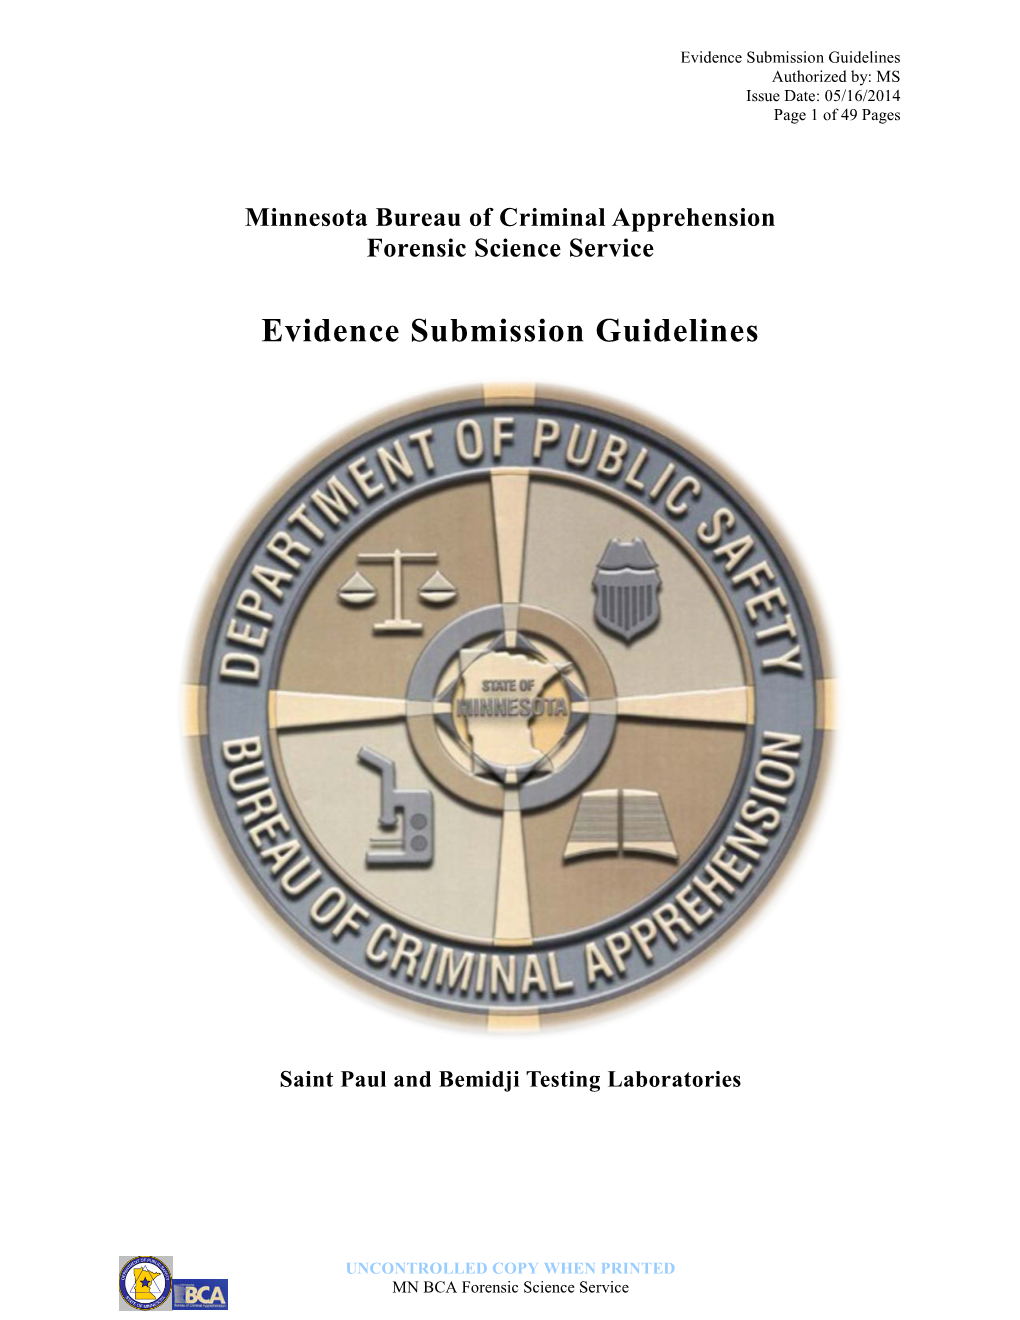 MN BCA Forensic Science Service Evidence Submission Guidelines